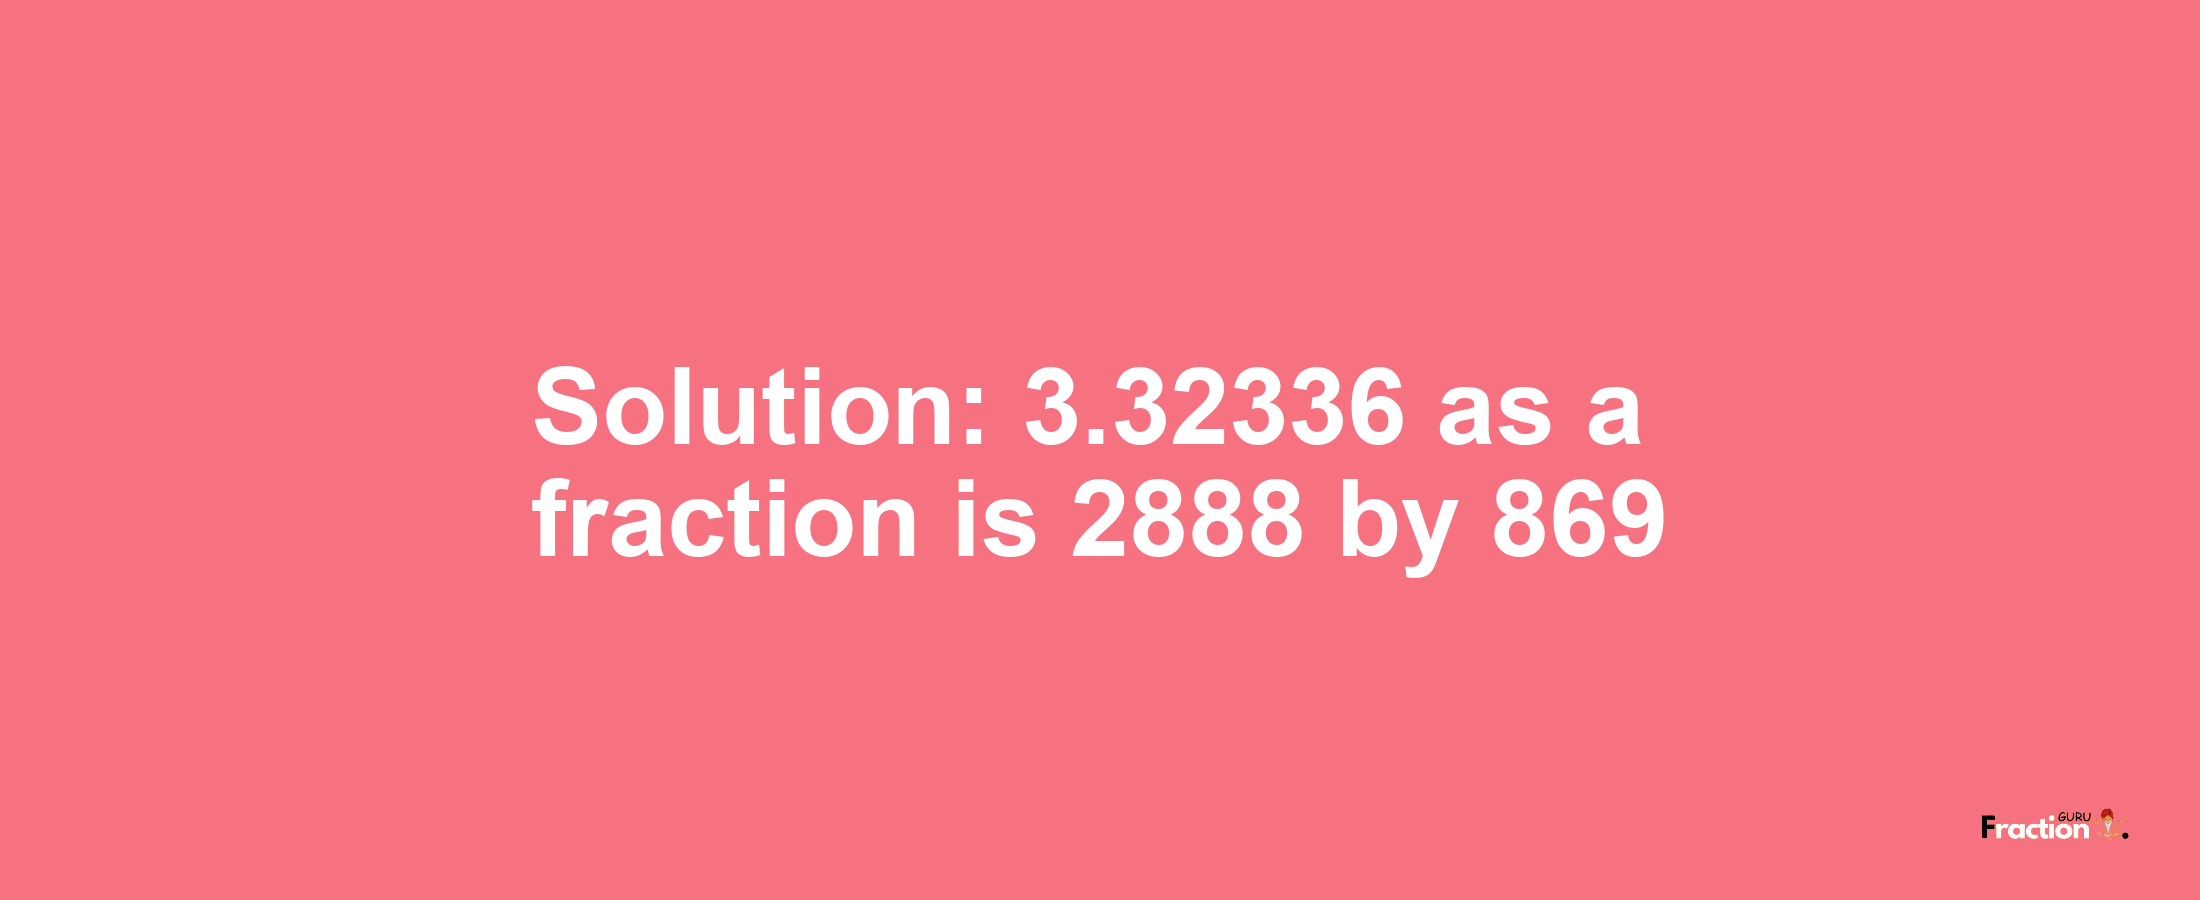 Solution:3.32336 as a fraction is 2888/869